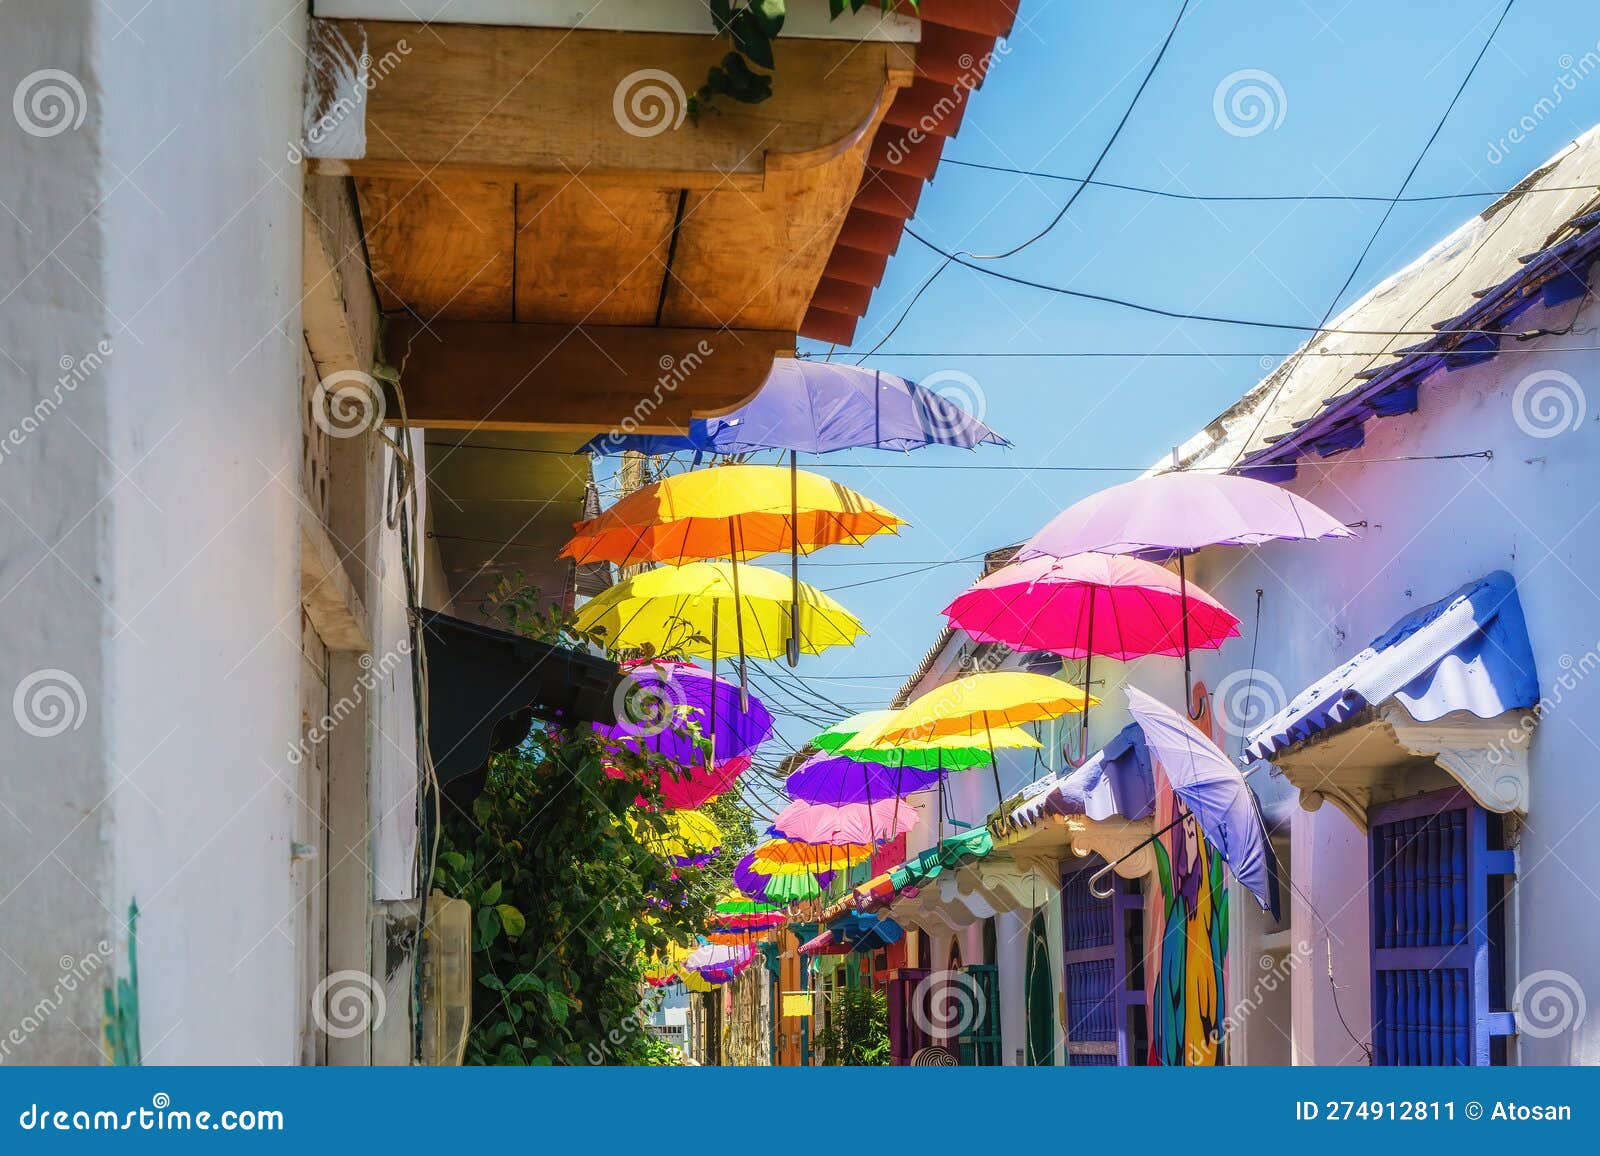 colorful houses in the getsemini district of cartagena de indias, colombia